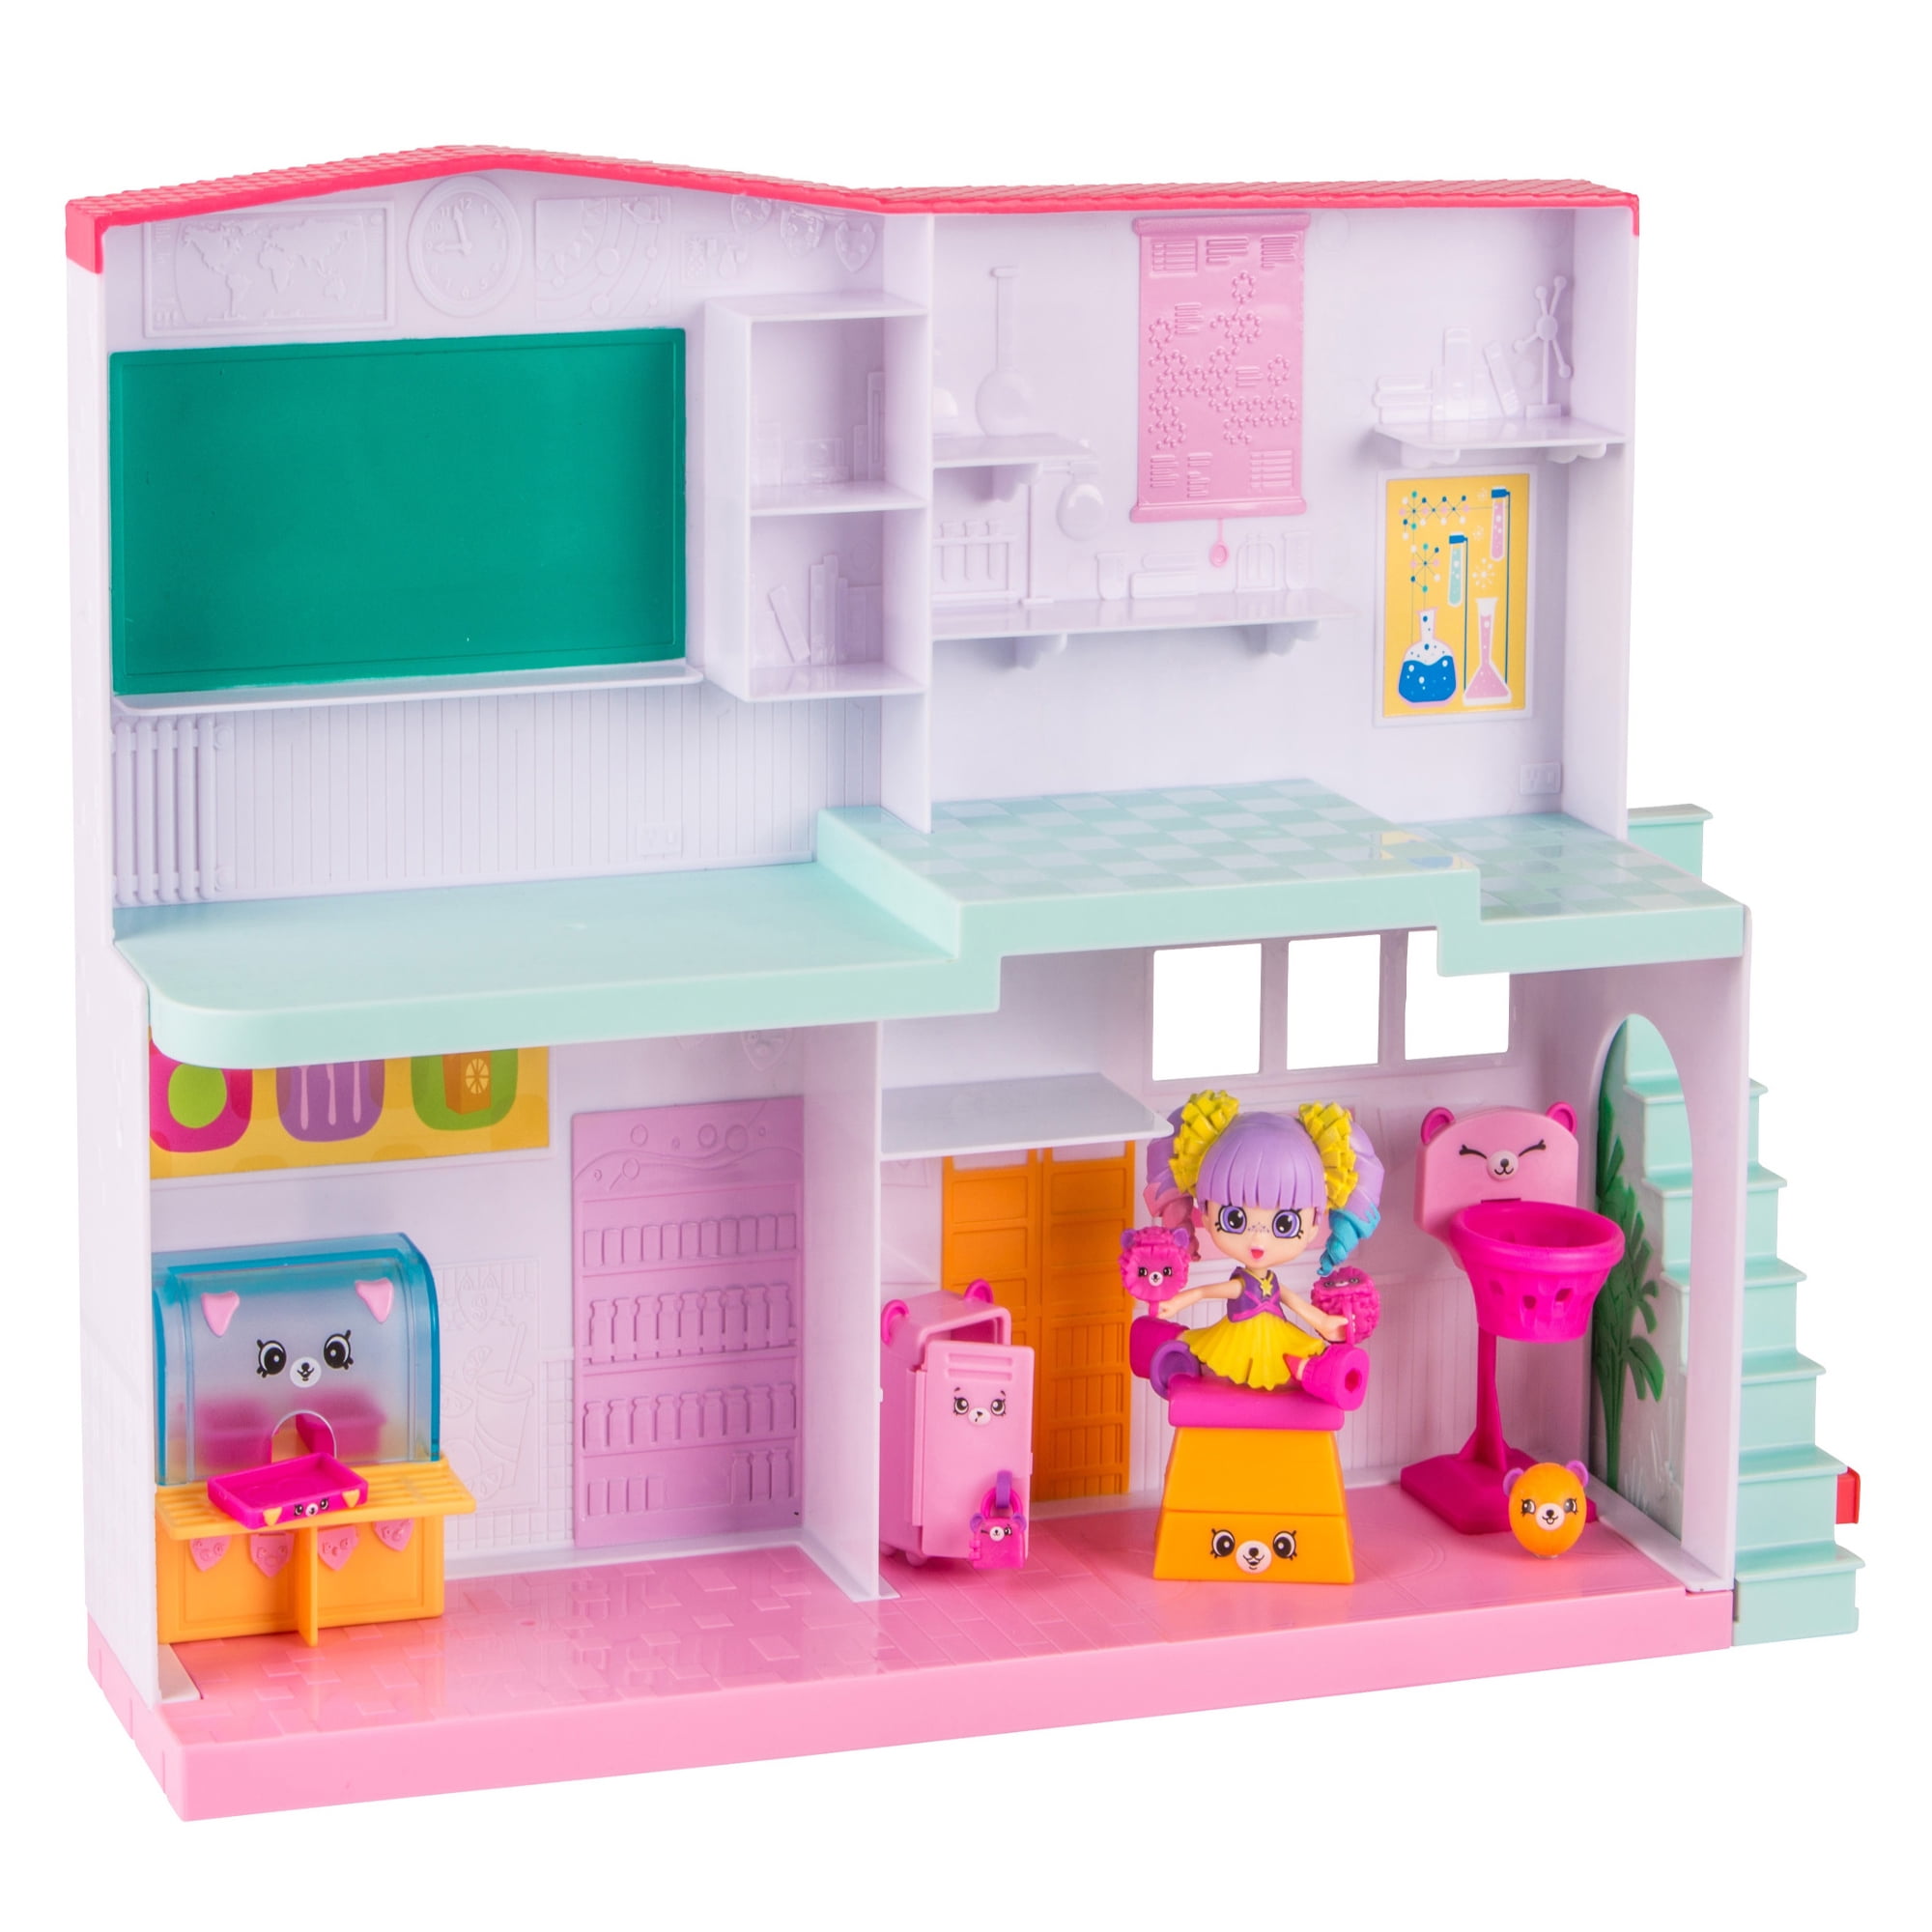 Shopkins Happy Places Doll House Line, 1-Pack Happyville High School Playset